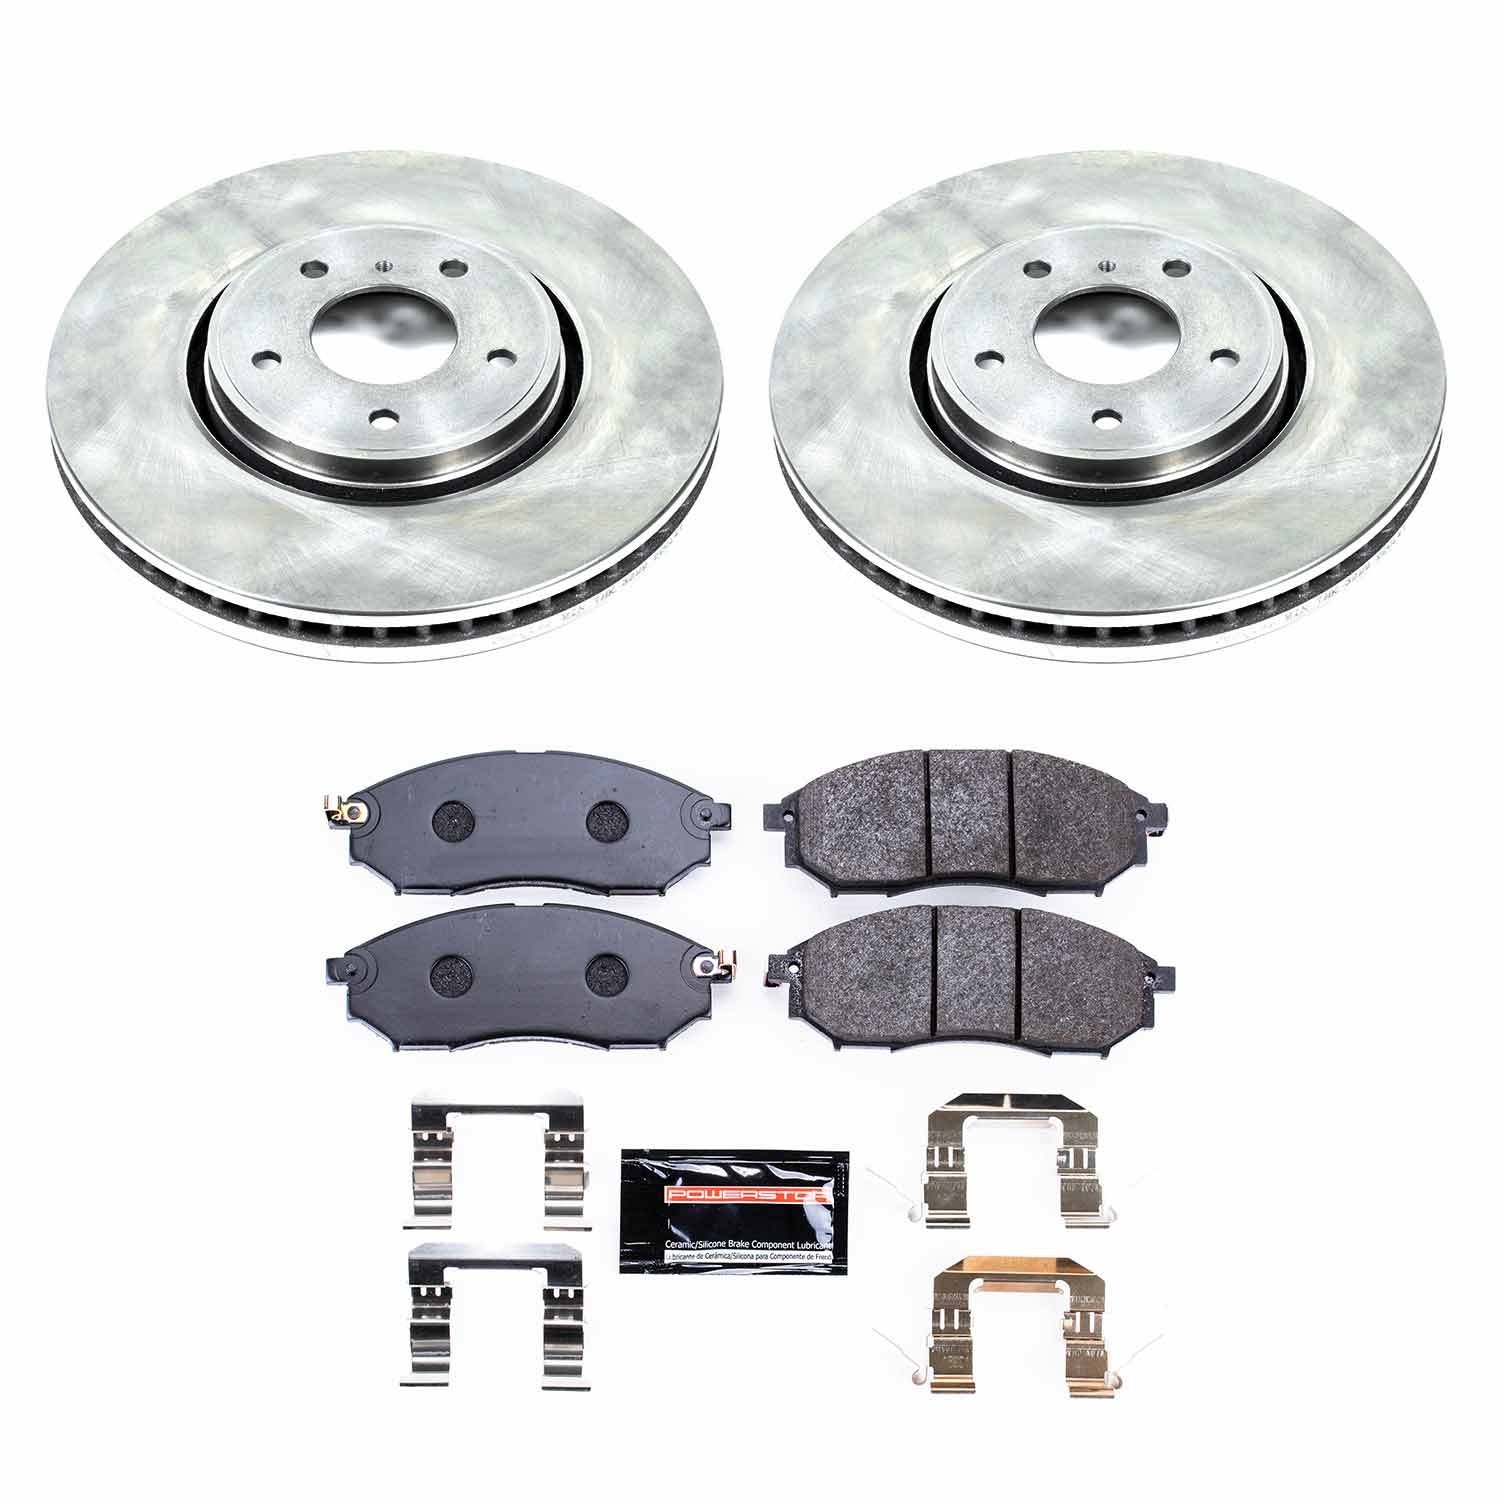 Friction Brake Pads for Track